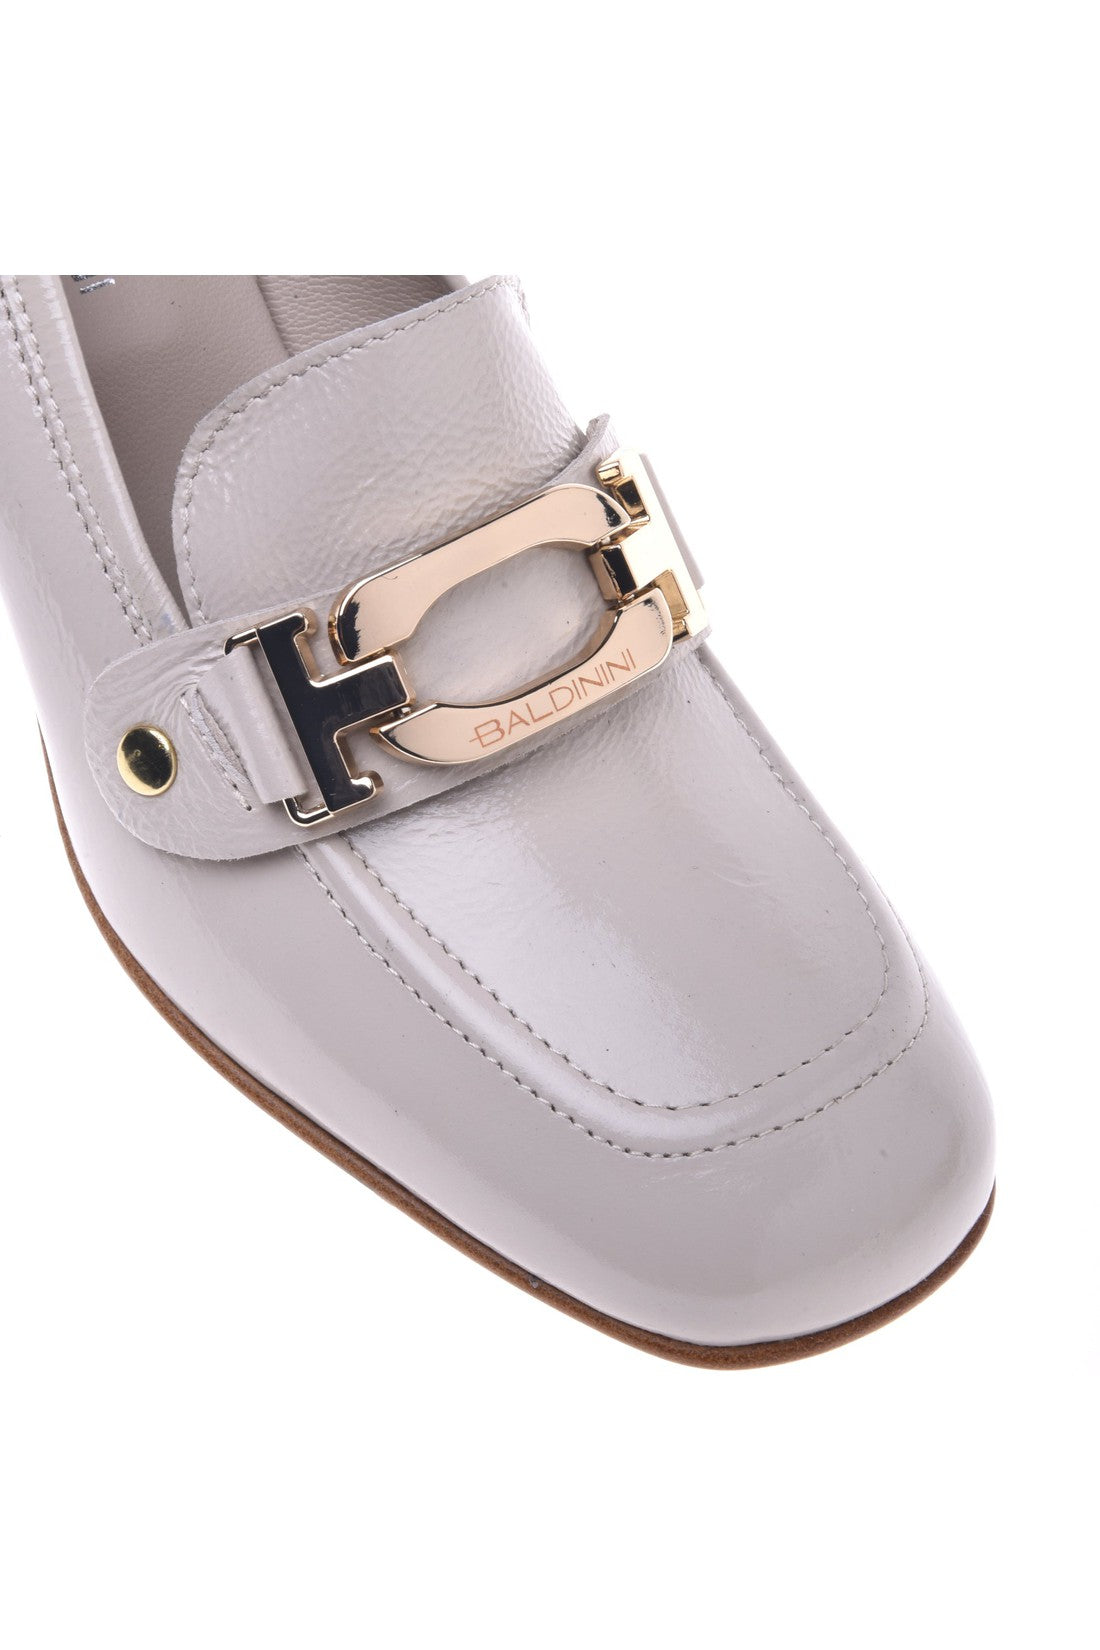 Loafer in cream naplak leather